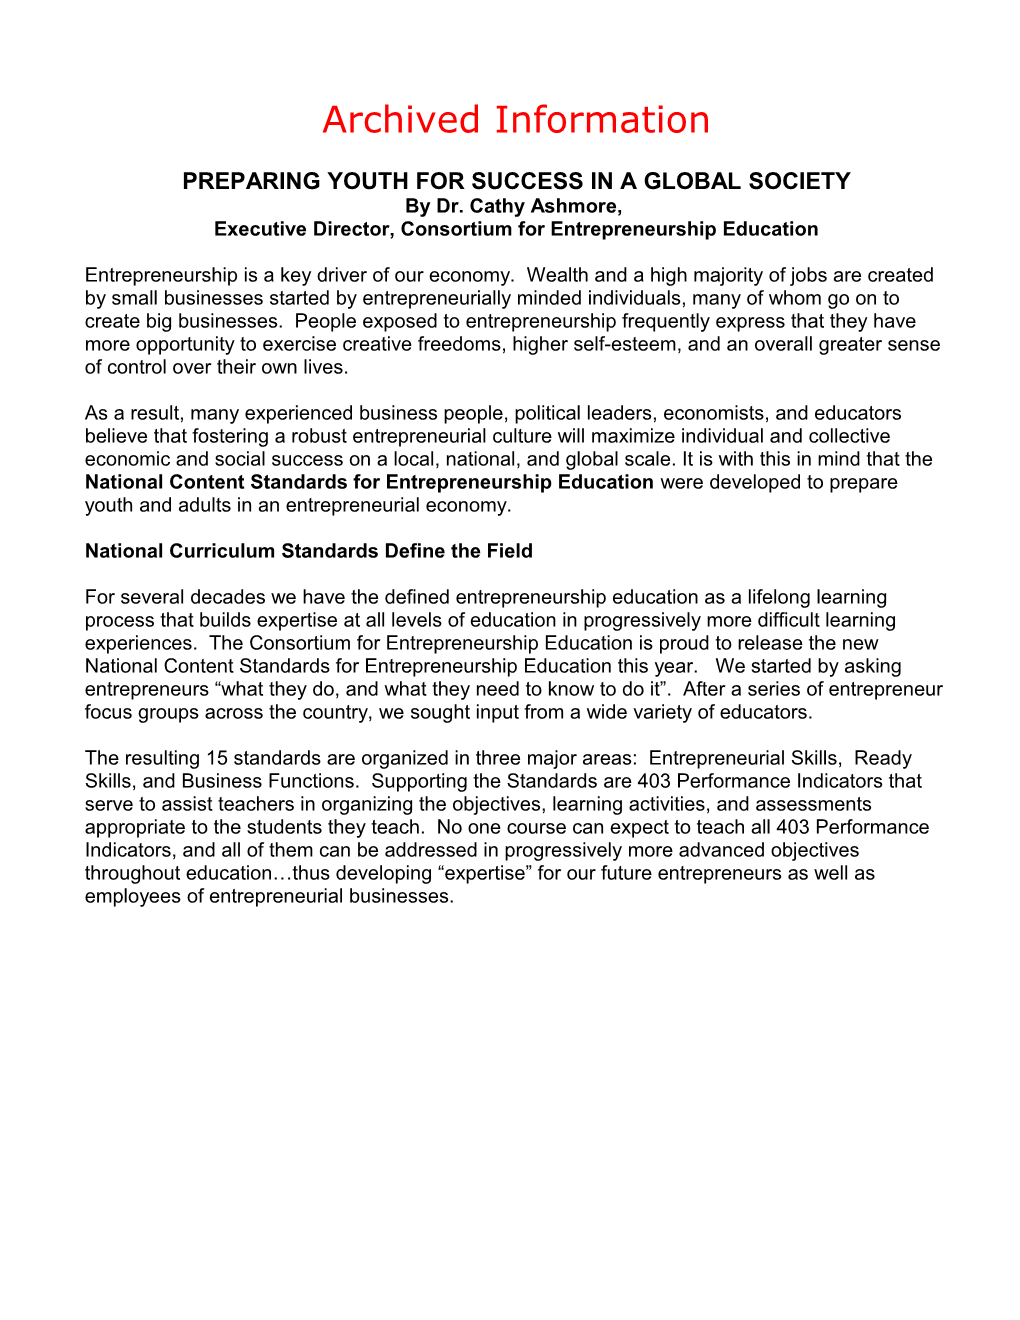 Archived: Preparing Youth for Success in a Global Society (MS Word)